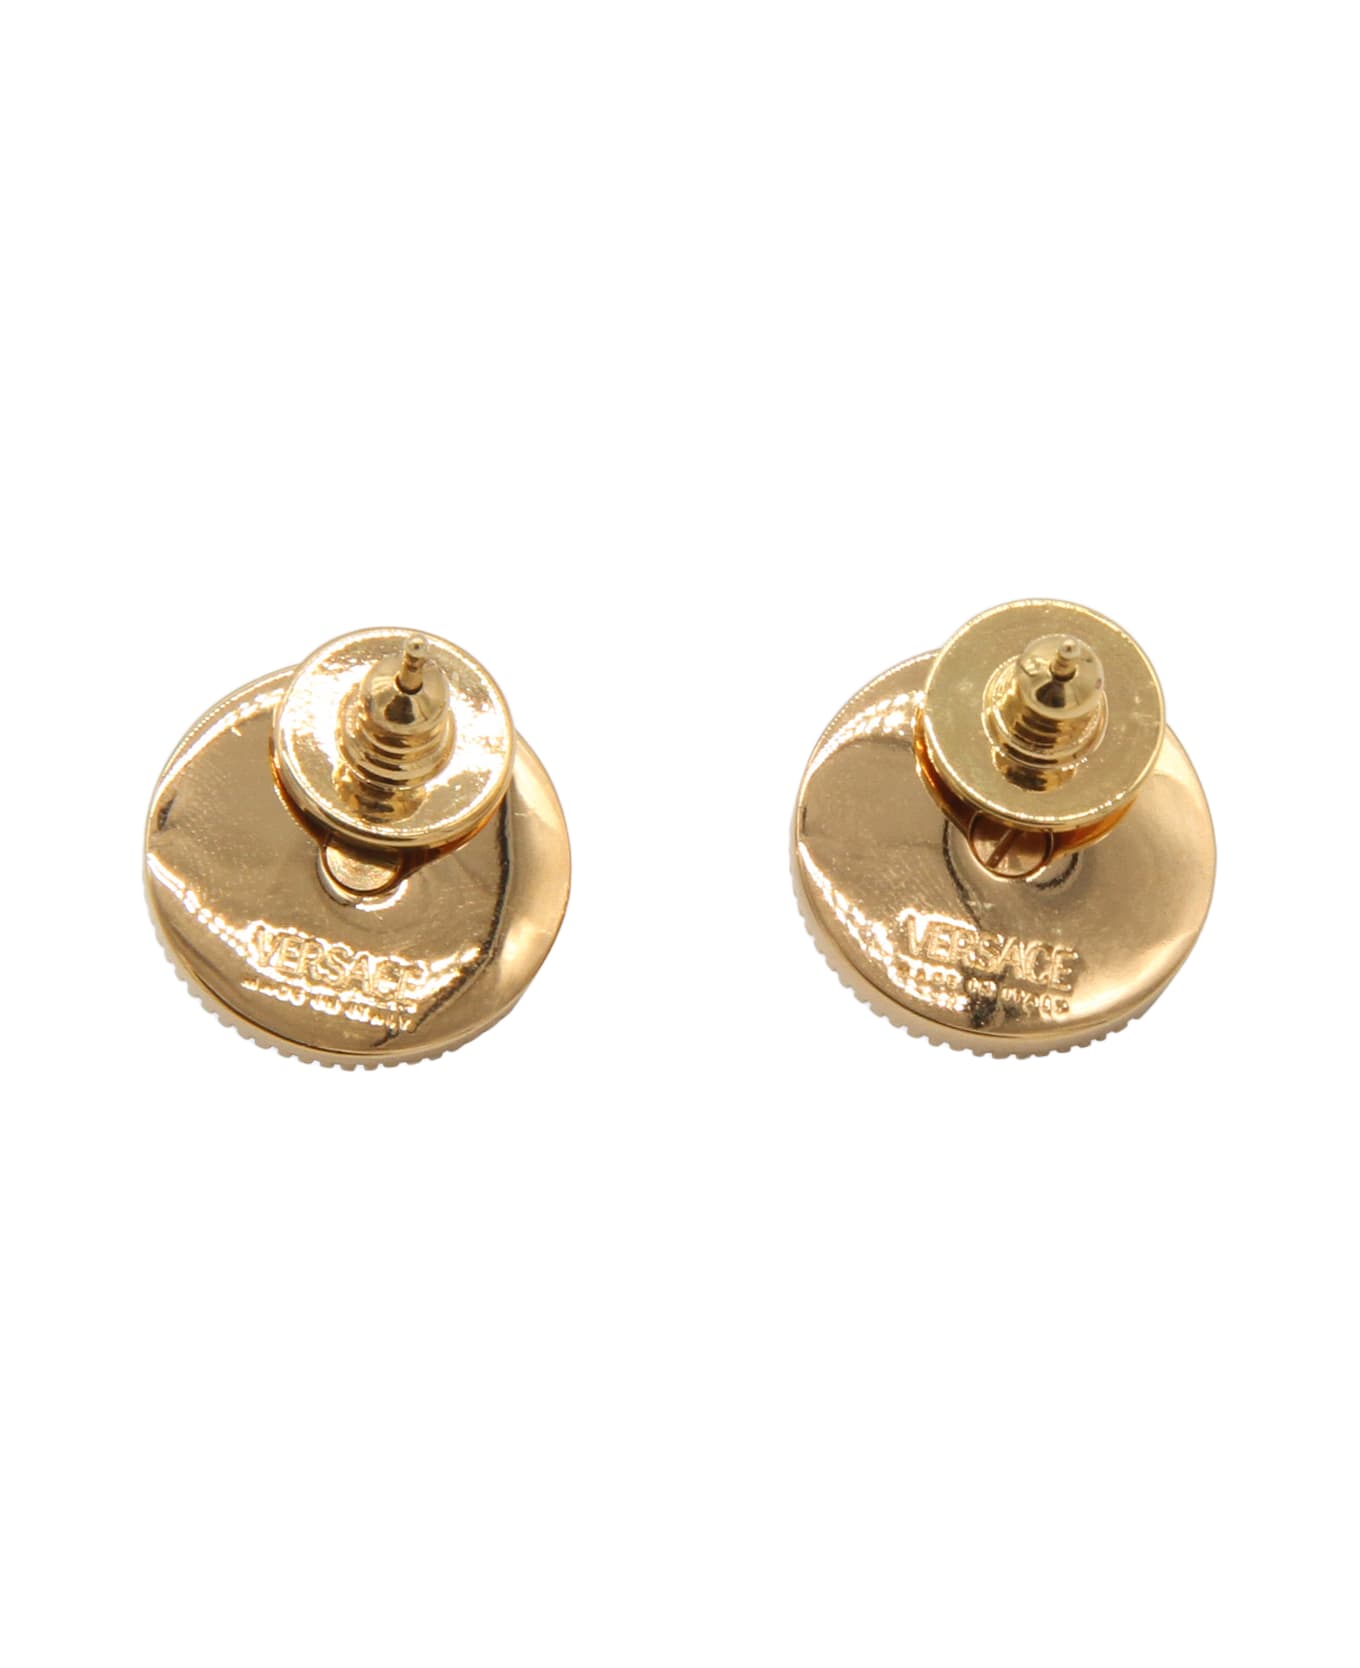 Versace Gold- Tone And Silver Metal Medusa Earrings - Golden